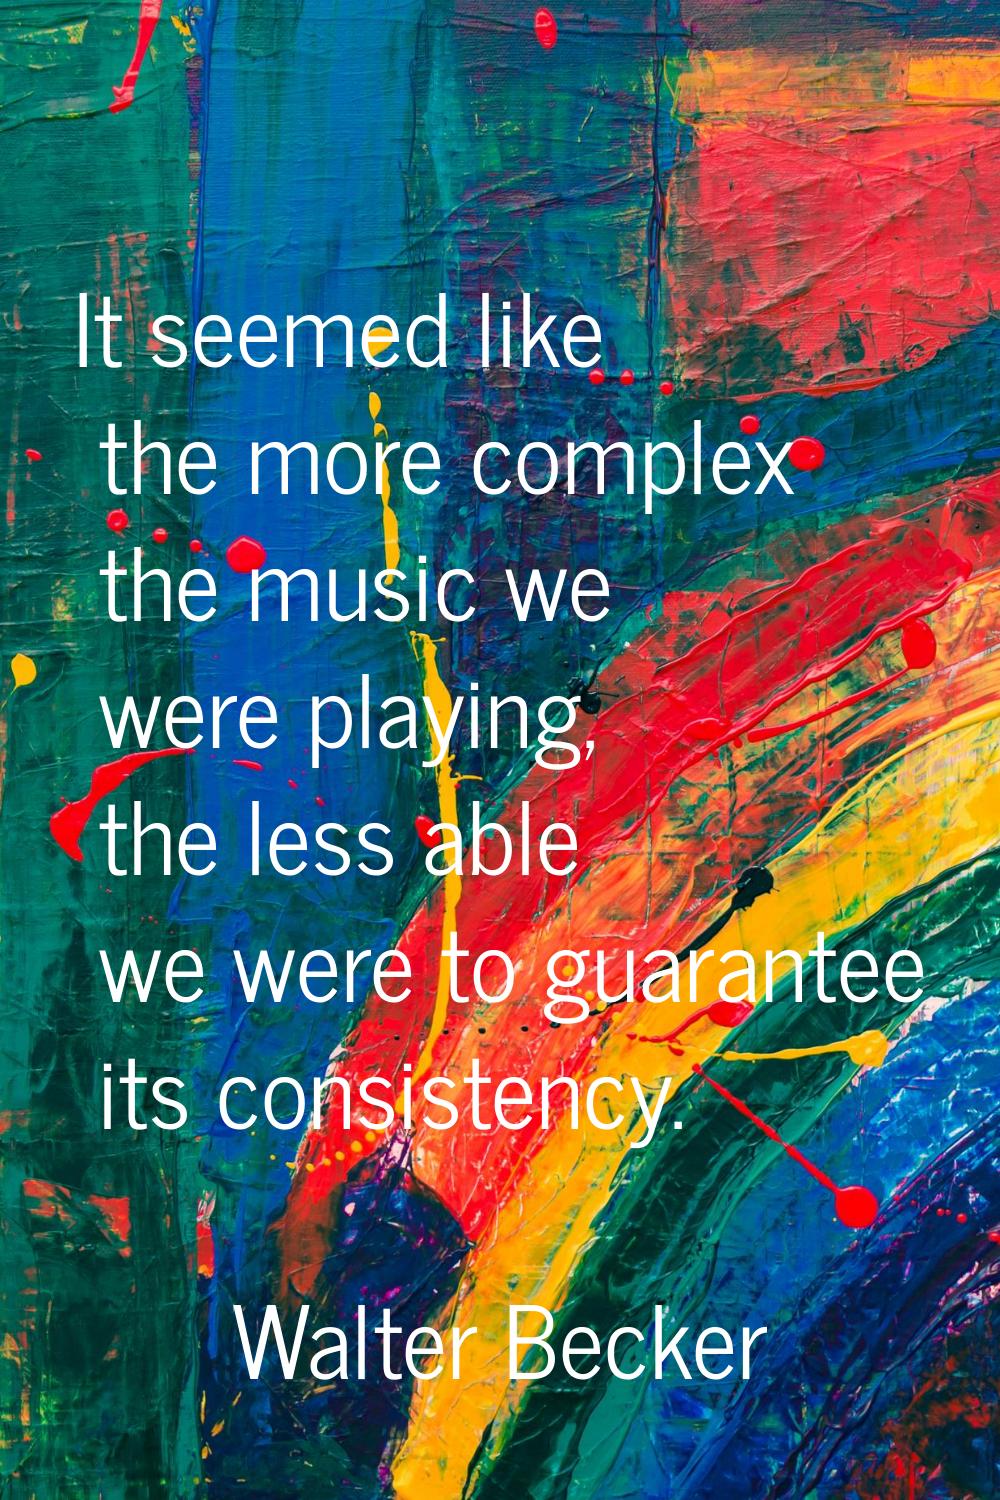 It seemed like the more complex the music we were playing, the less able we were to guarantee its c